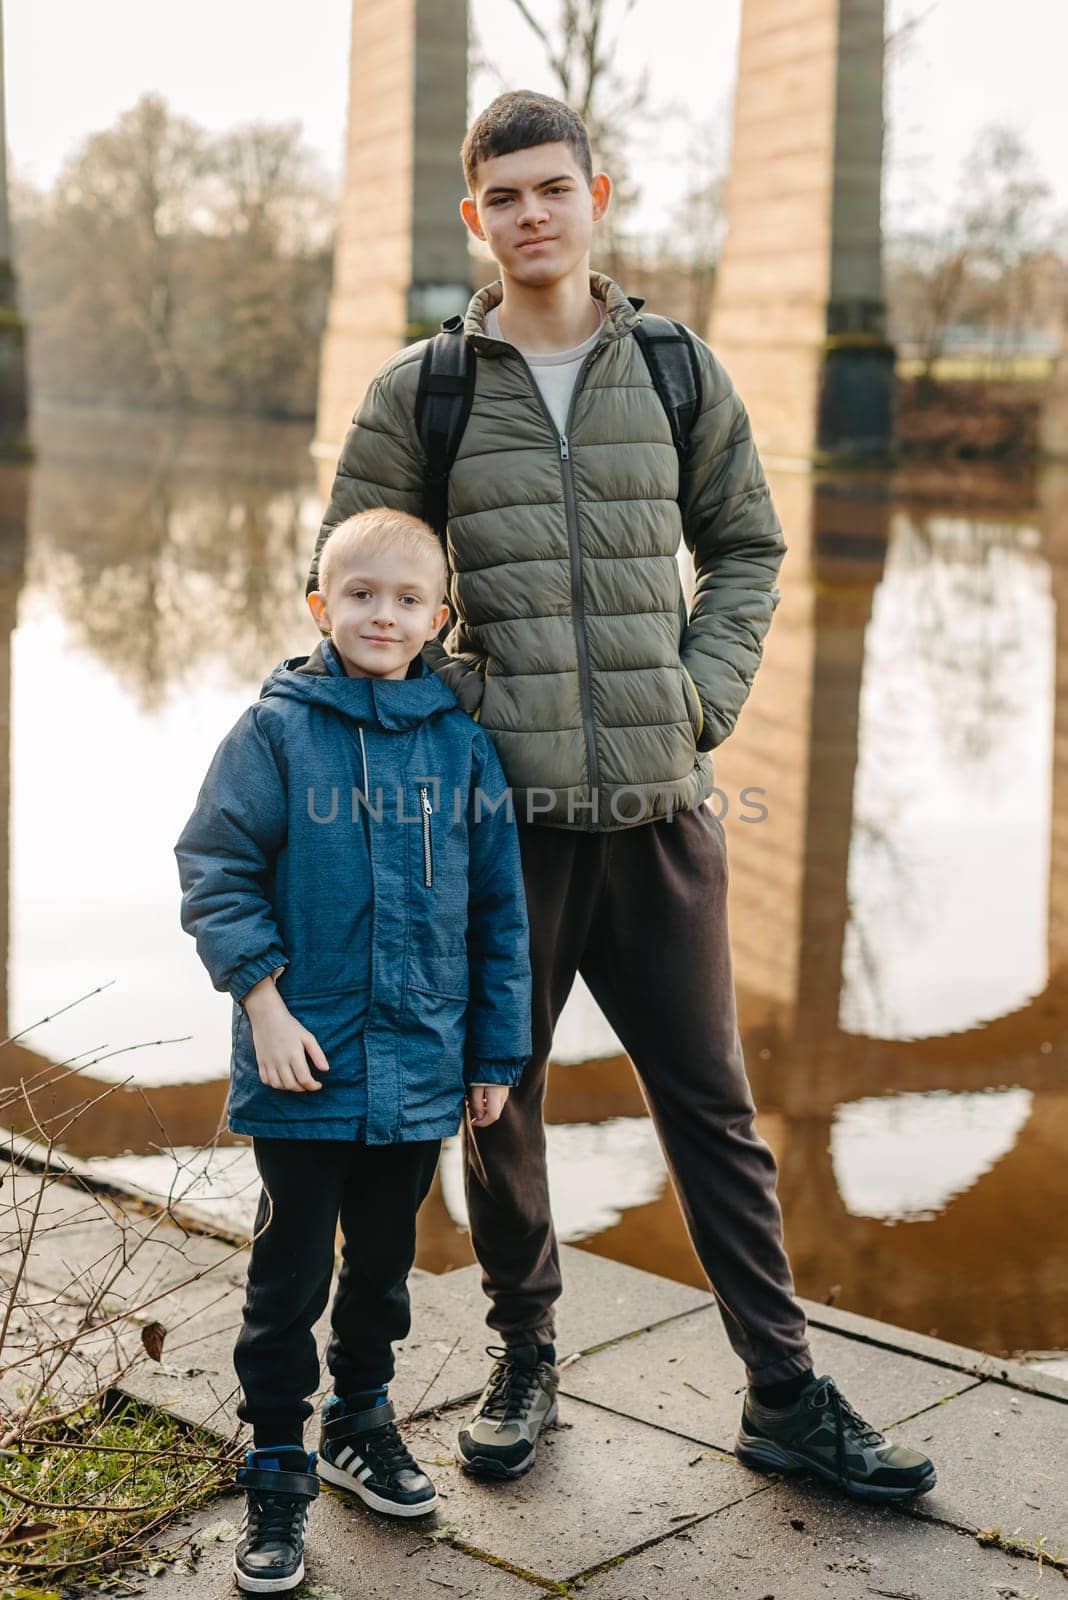 Winter Riverside Moment: Two Boys (8 and 17 Years Old) in Jackets Stand by the River and Bridge Piers, Autumn or Winter. Capture the essence of seasonal camaraderie with this image featuring two boys, aged 8 and 17, donned in winter jackets, standing against the backdrop of a river and bridge piers. The photograph beautifully encapsulates the spirit of autumn or winter, showcasing the bond between the boys in a serene riverside setting.